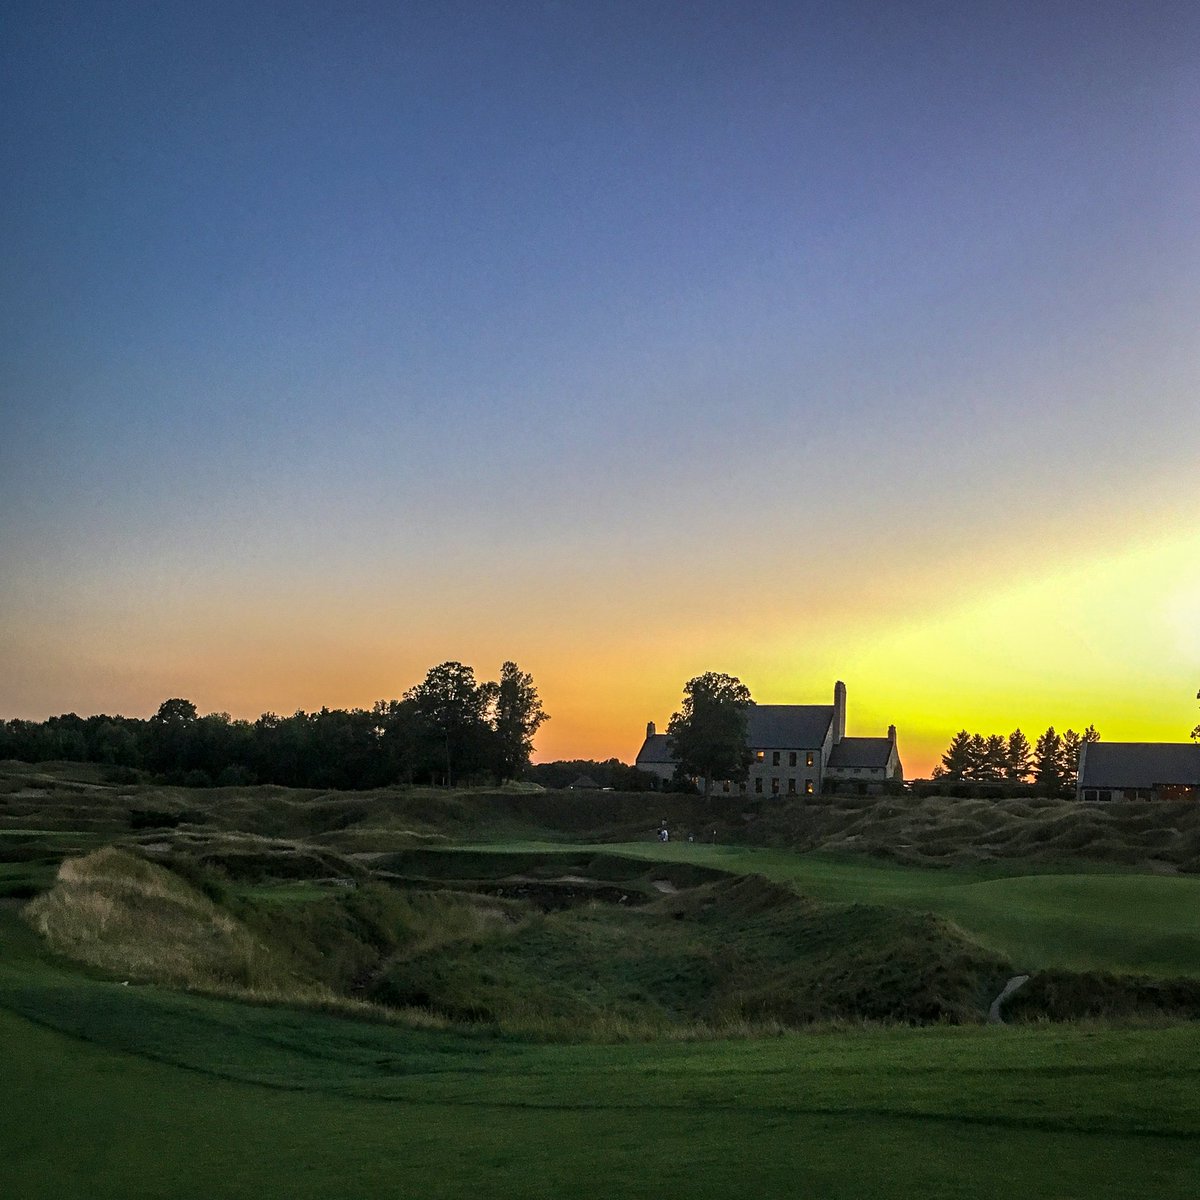 The 18th hole on Whistling Straits is a 520 yd. par 4 known as 'Dyeabolical' is one of the hardest closing holes in golf. The tee shot lands on one of two fairways with a long second shot over a hazard to slope laden green complex. #GoForeIt #PeteDye #golfcoursemarketing